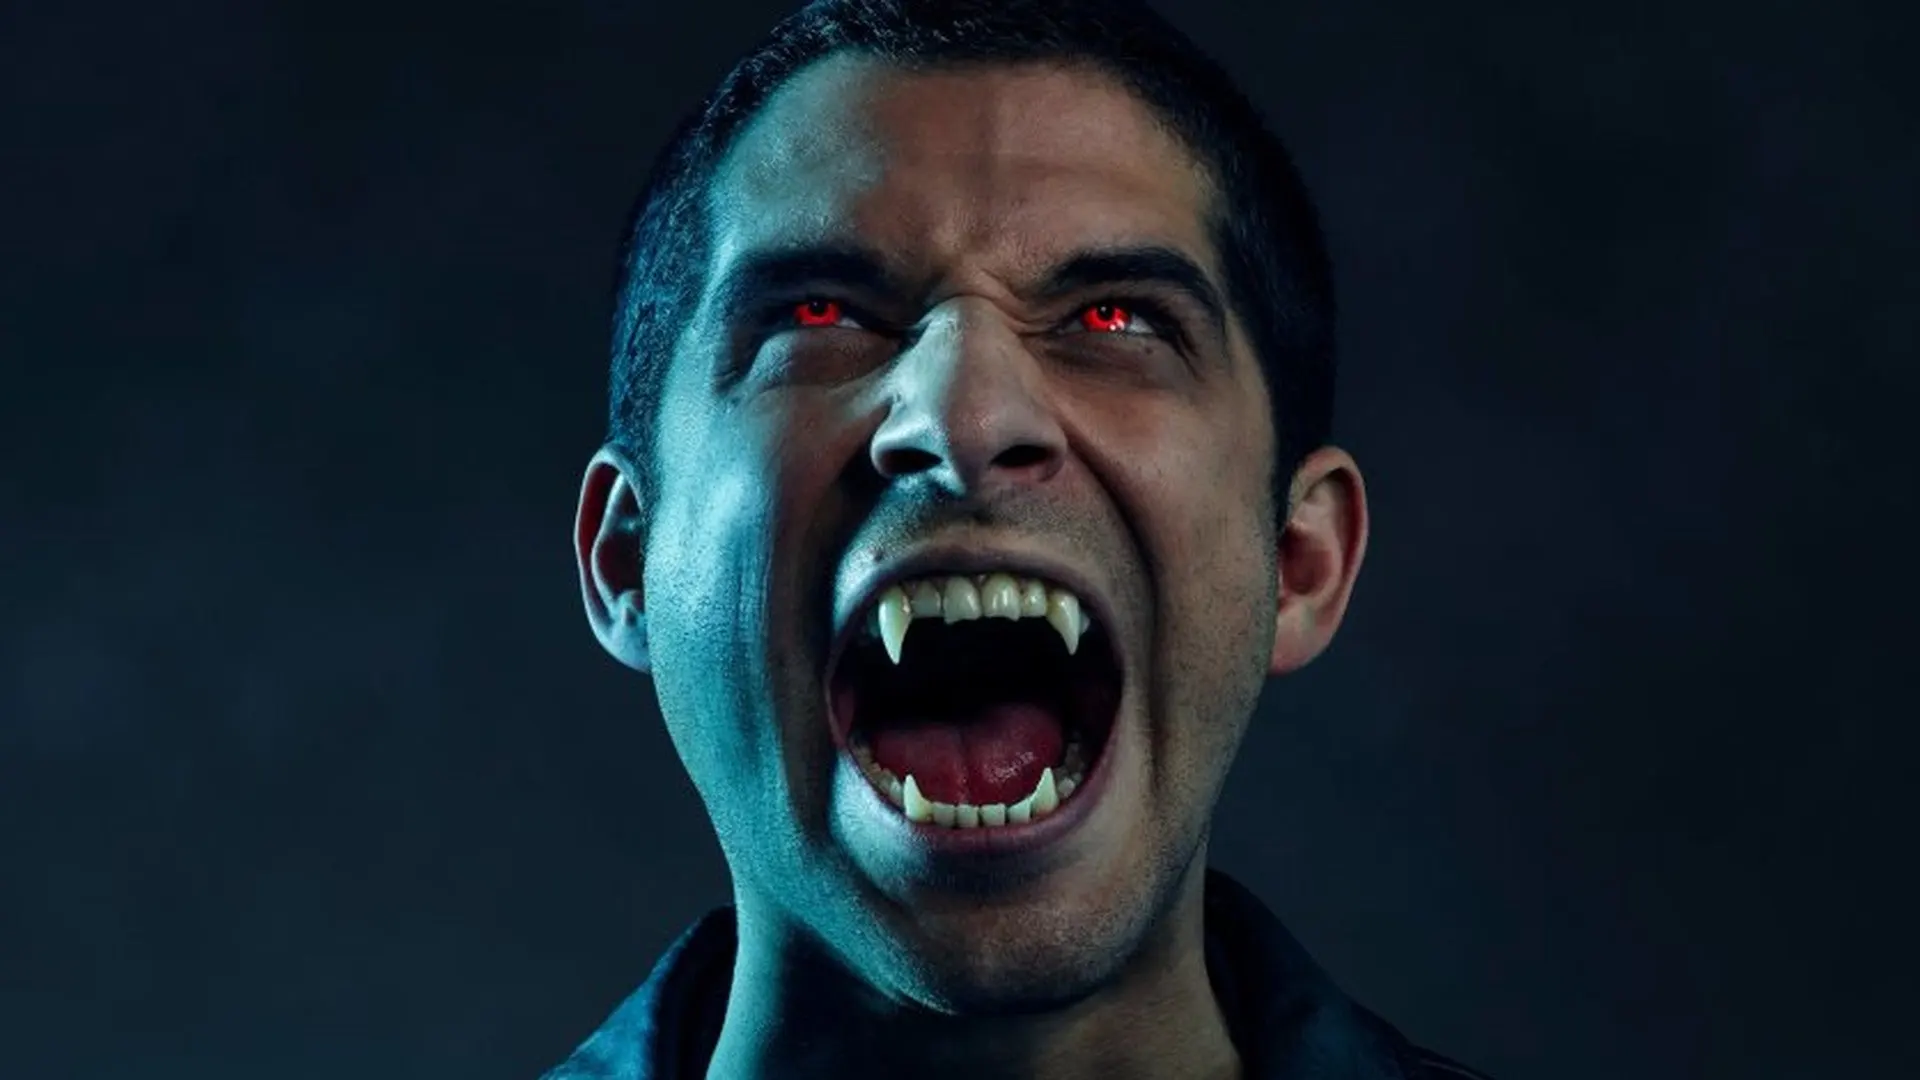 Tyler Posey as Scott McCall in the Teen Wolf Movie